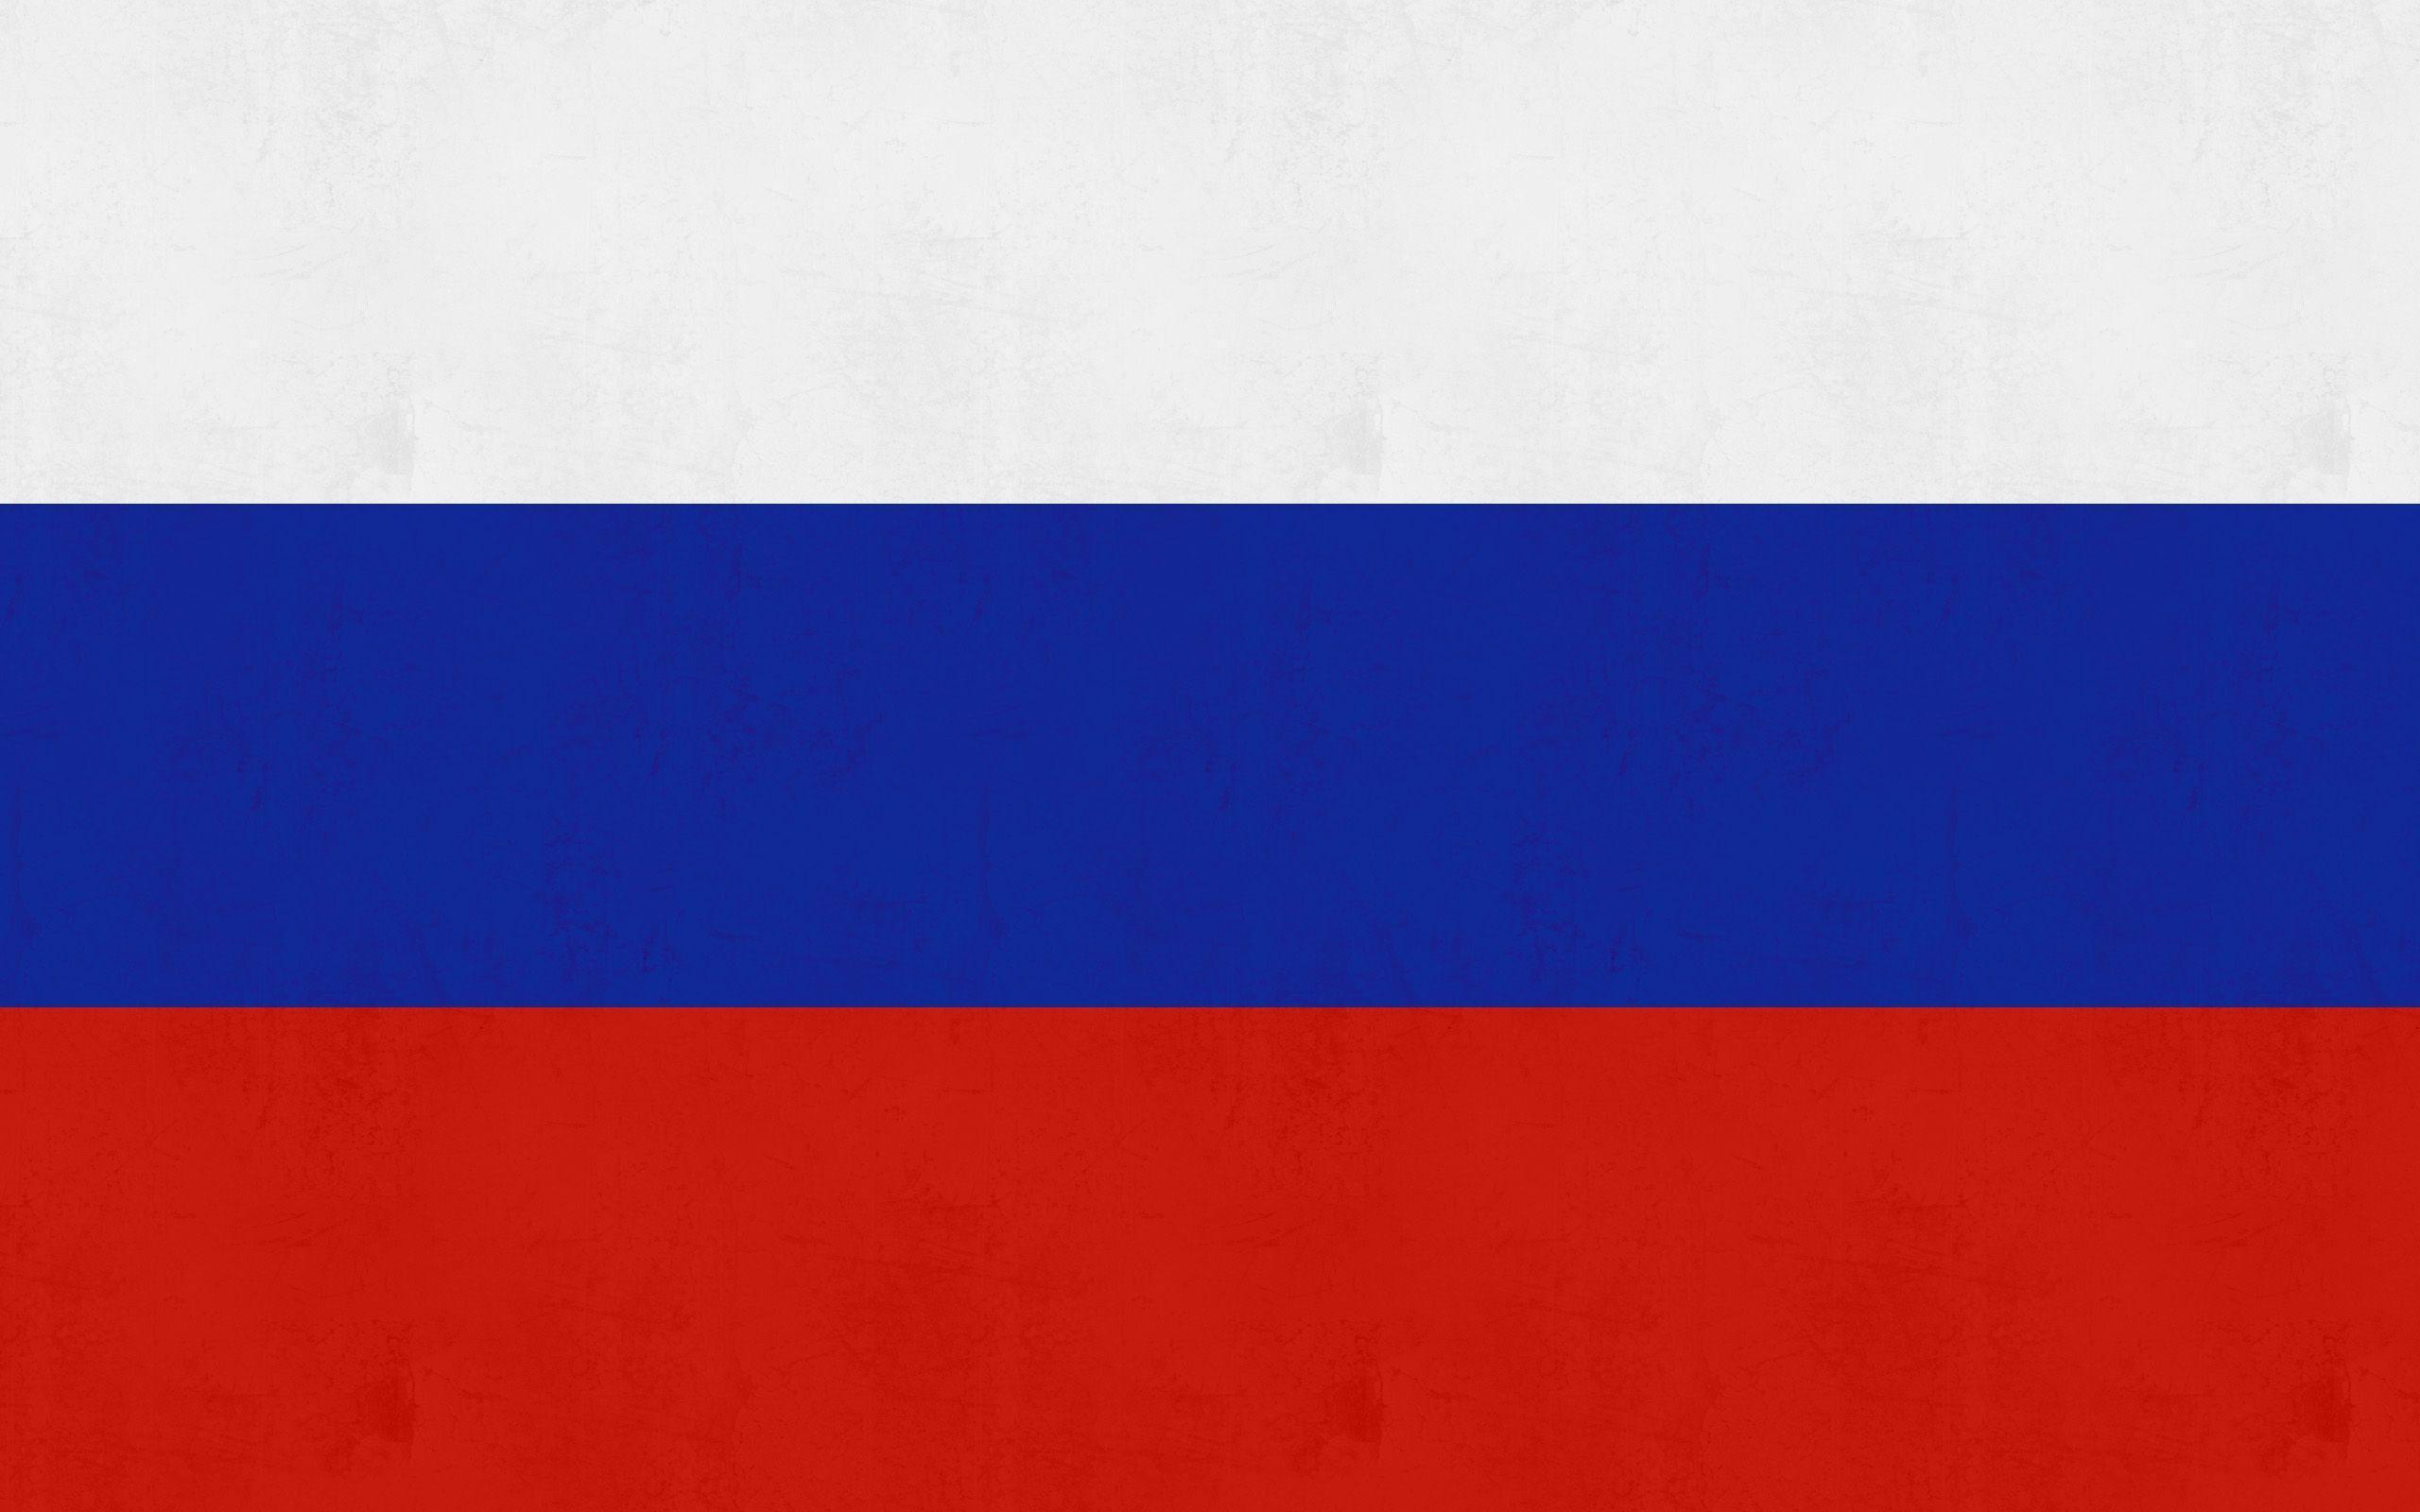 Russian Flag Wallpaper with Skull by HrishitChouhan on DeviantArt